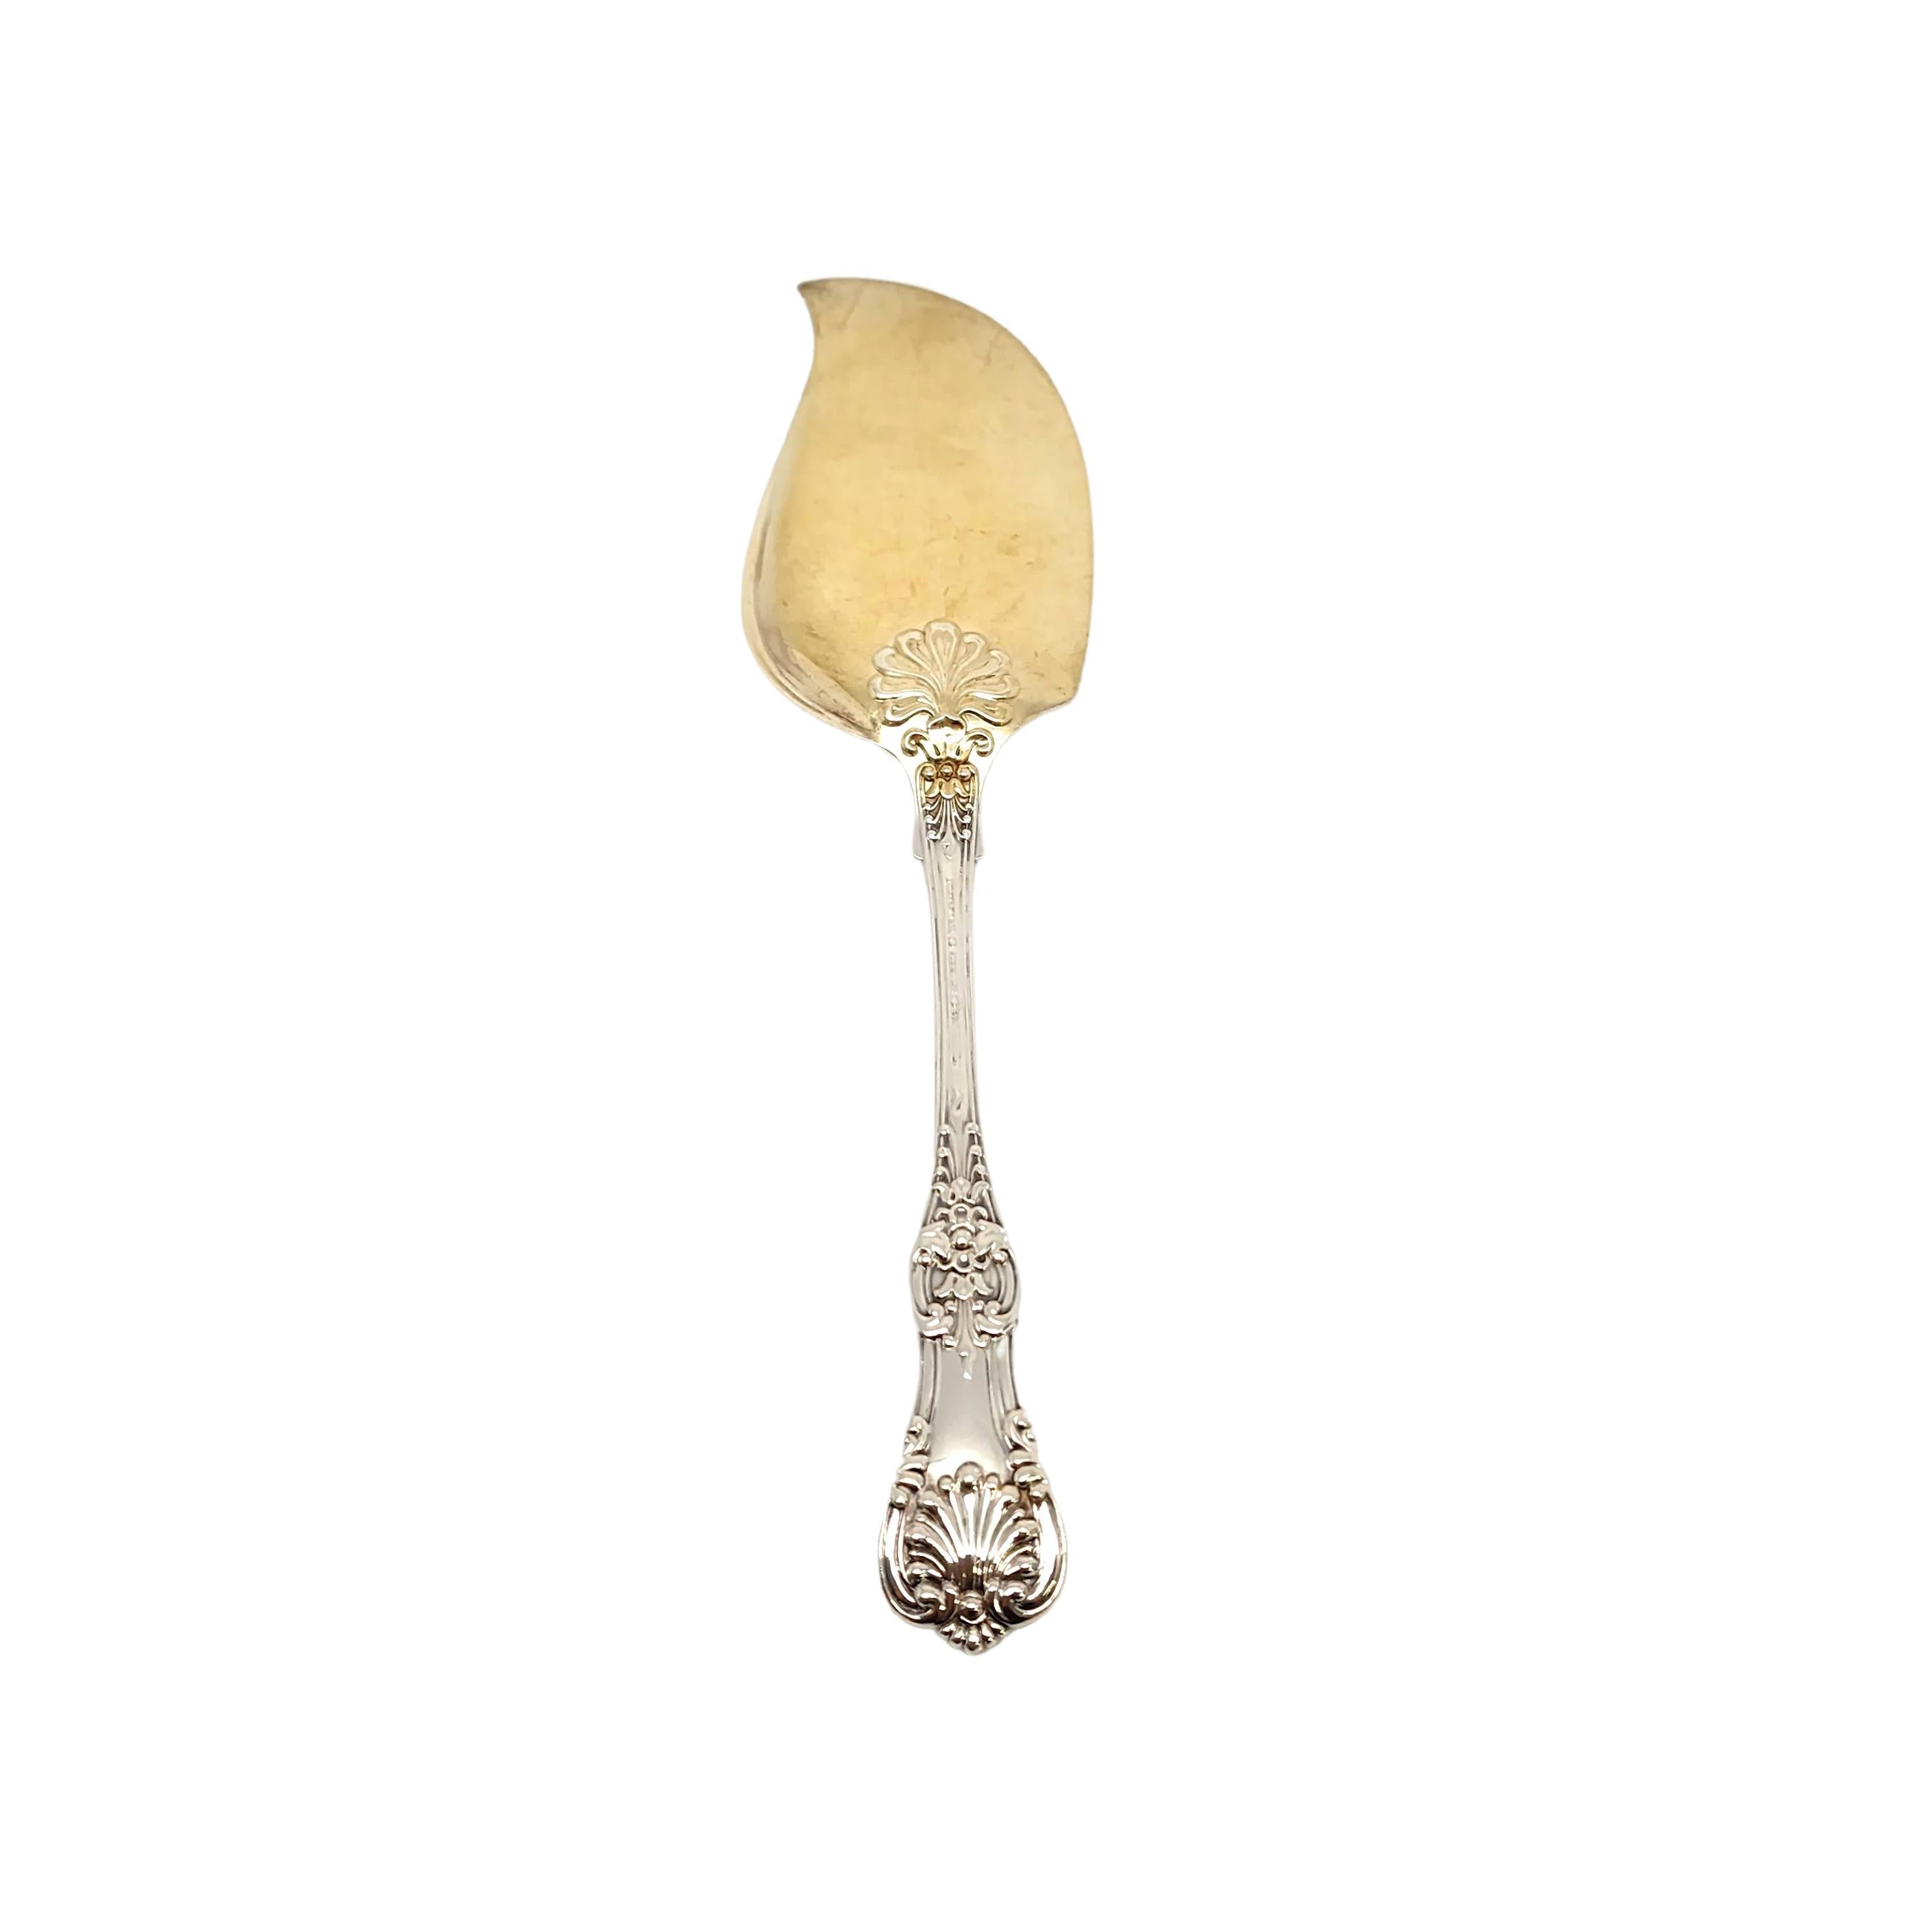 Tiffany & Co English King 1885 Sterling Silver Gold Wash Blade Ice Cream Server For Sale 7